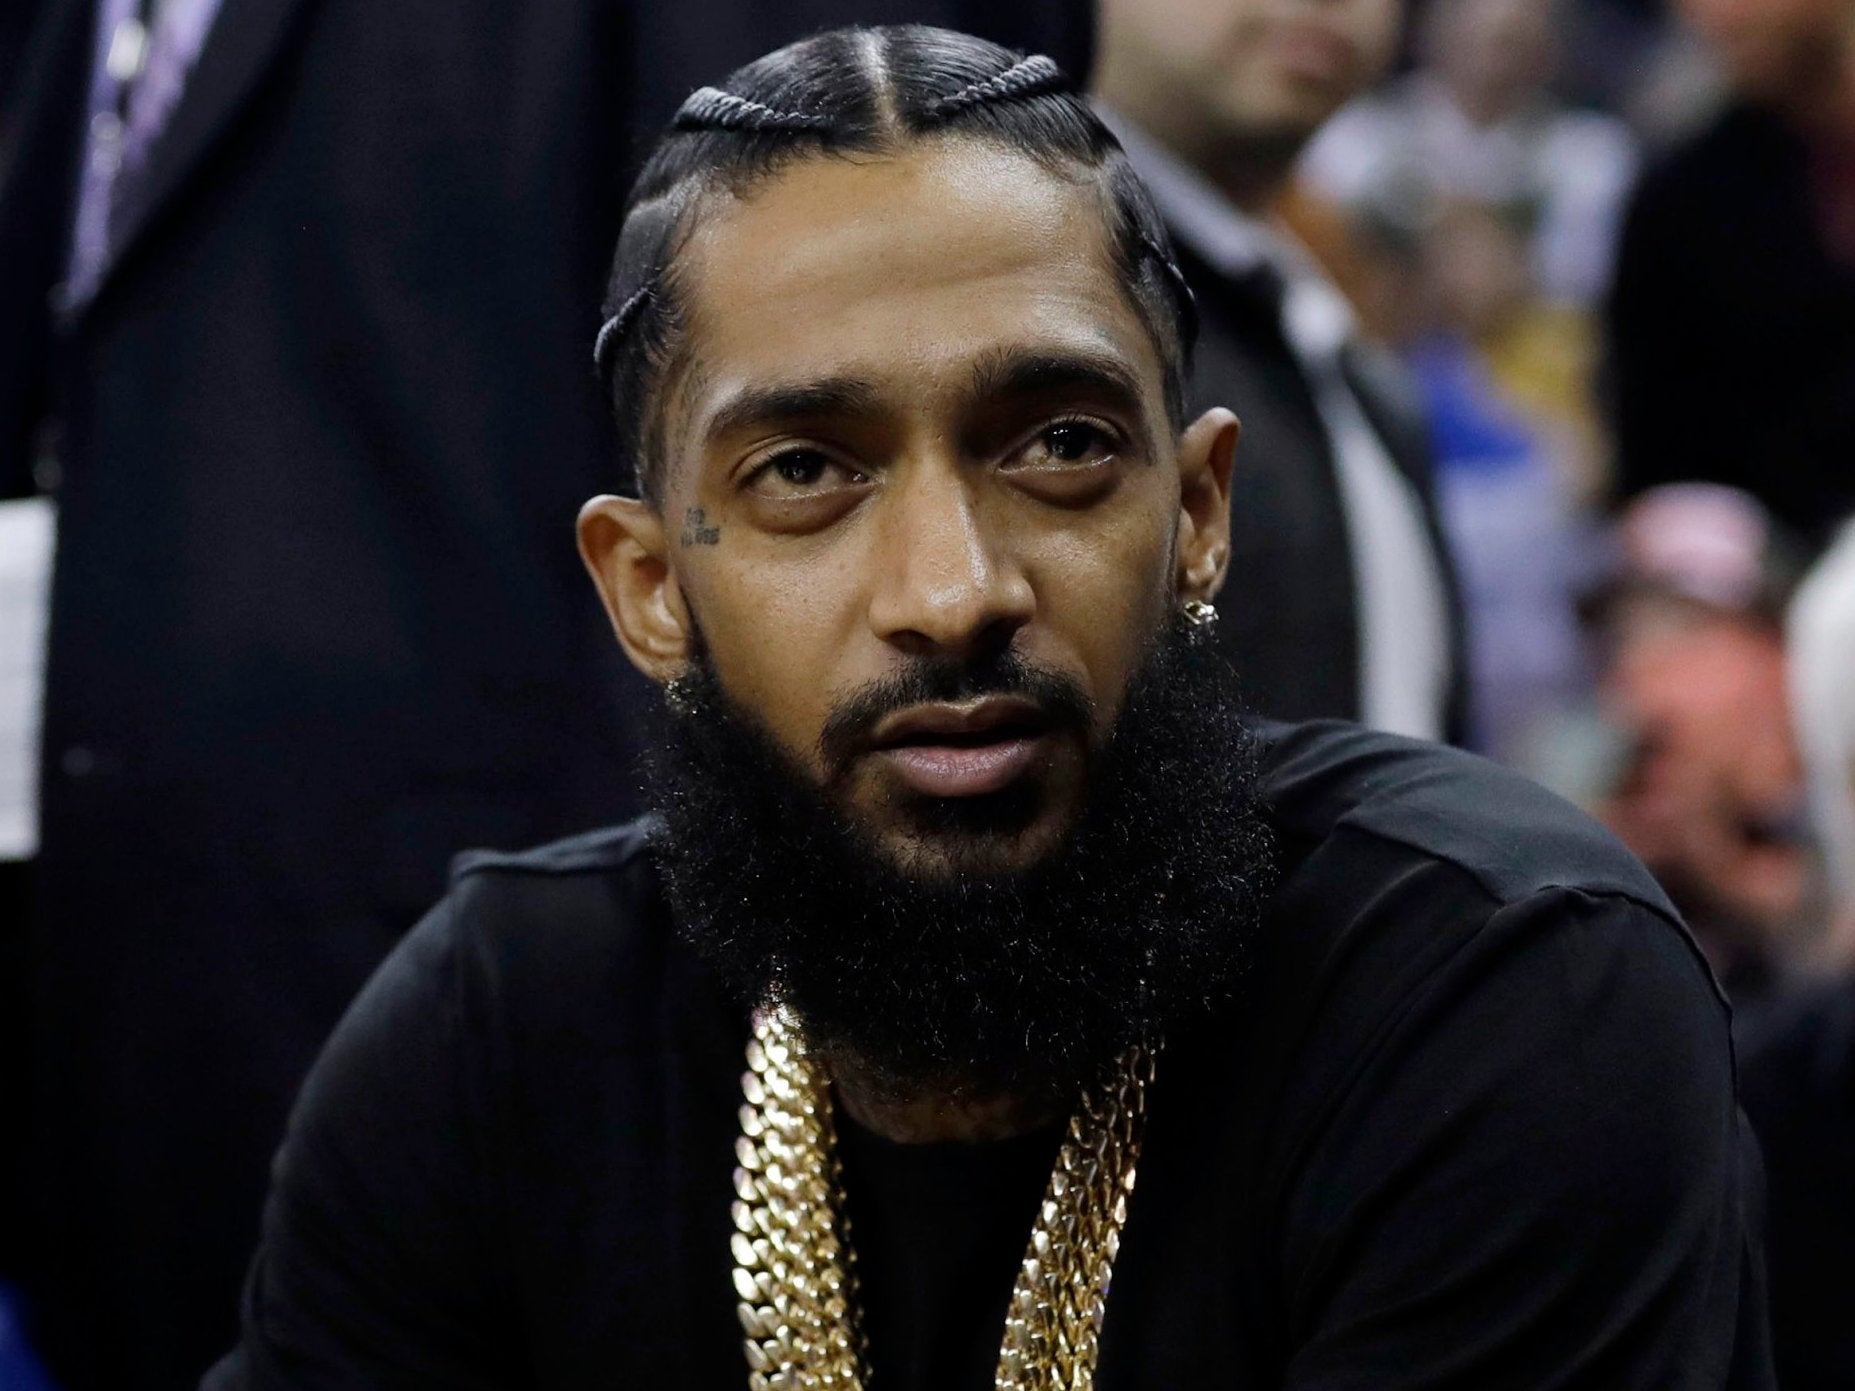 Nipsey Hussle was shot outside his clothing shop in south Los Angeles.